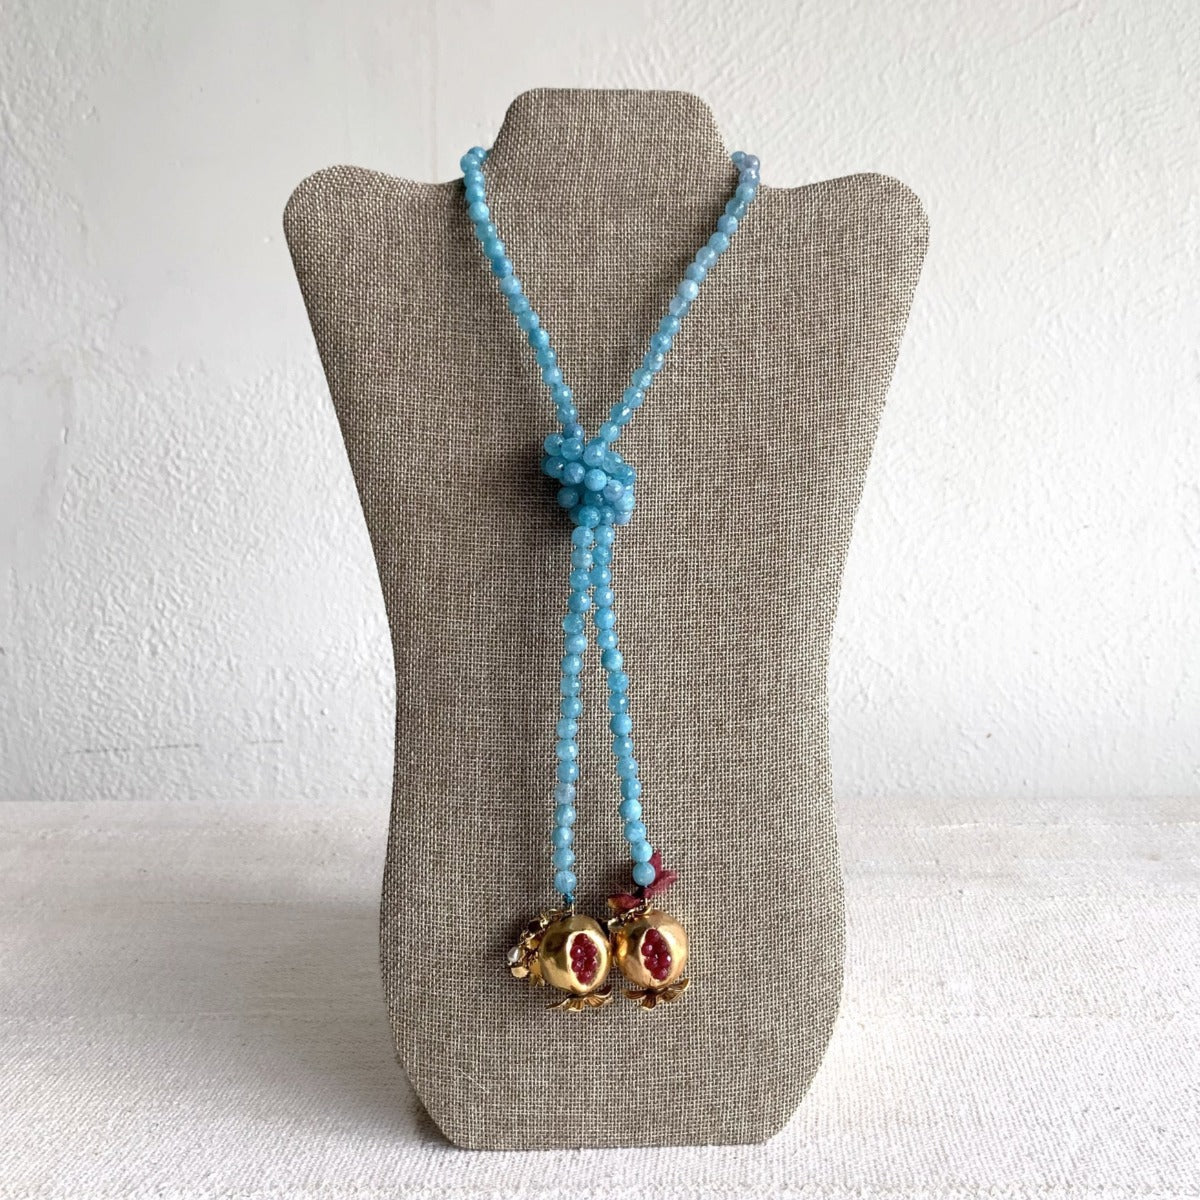 Fine Quality Blue Sapphire Shaded Beads Necklace - Gleam Jewels